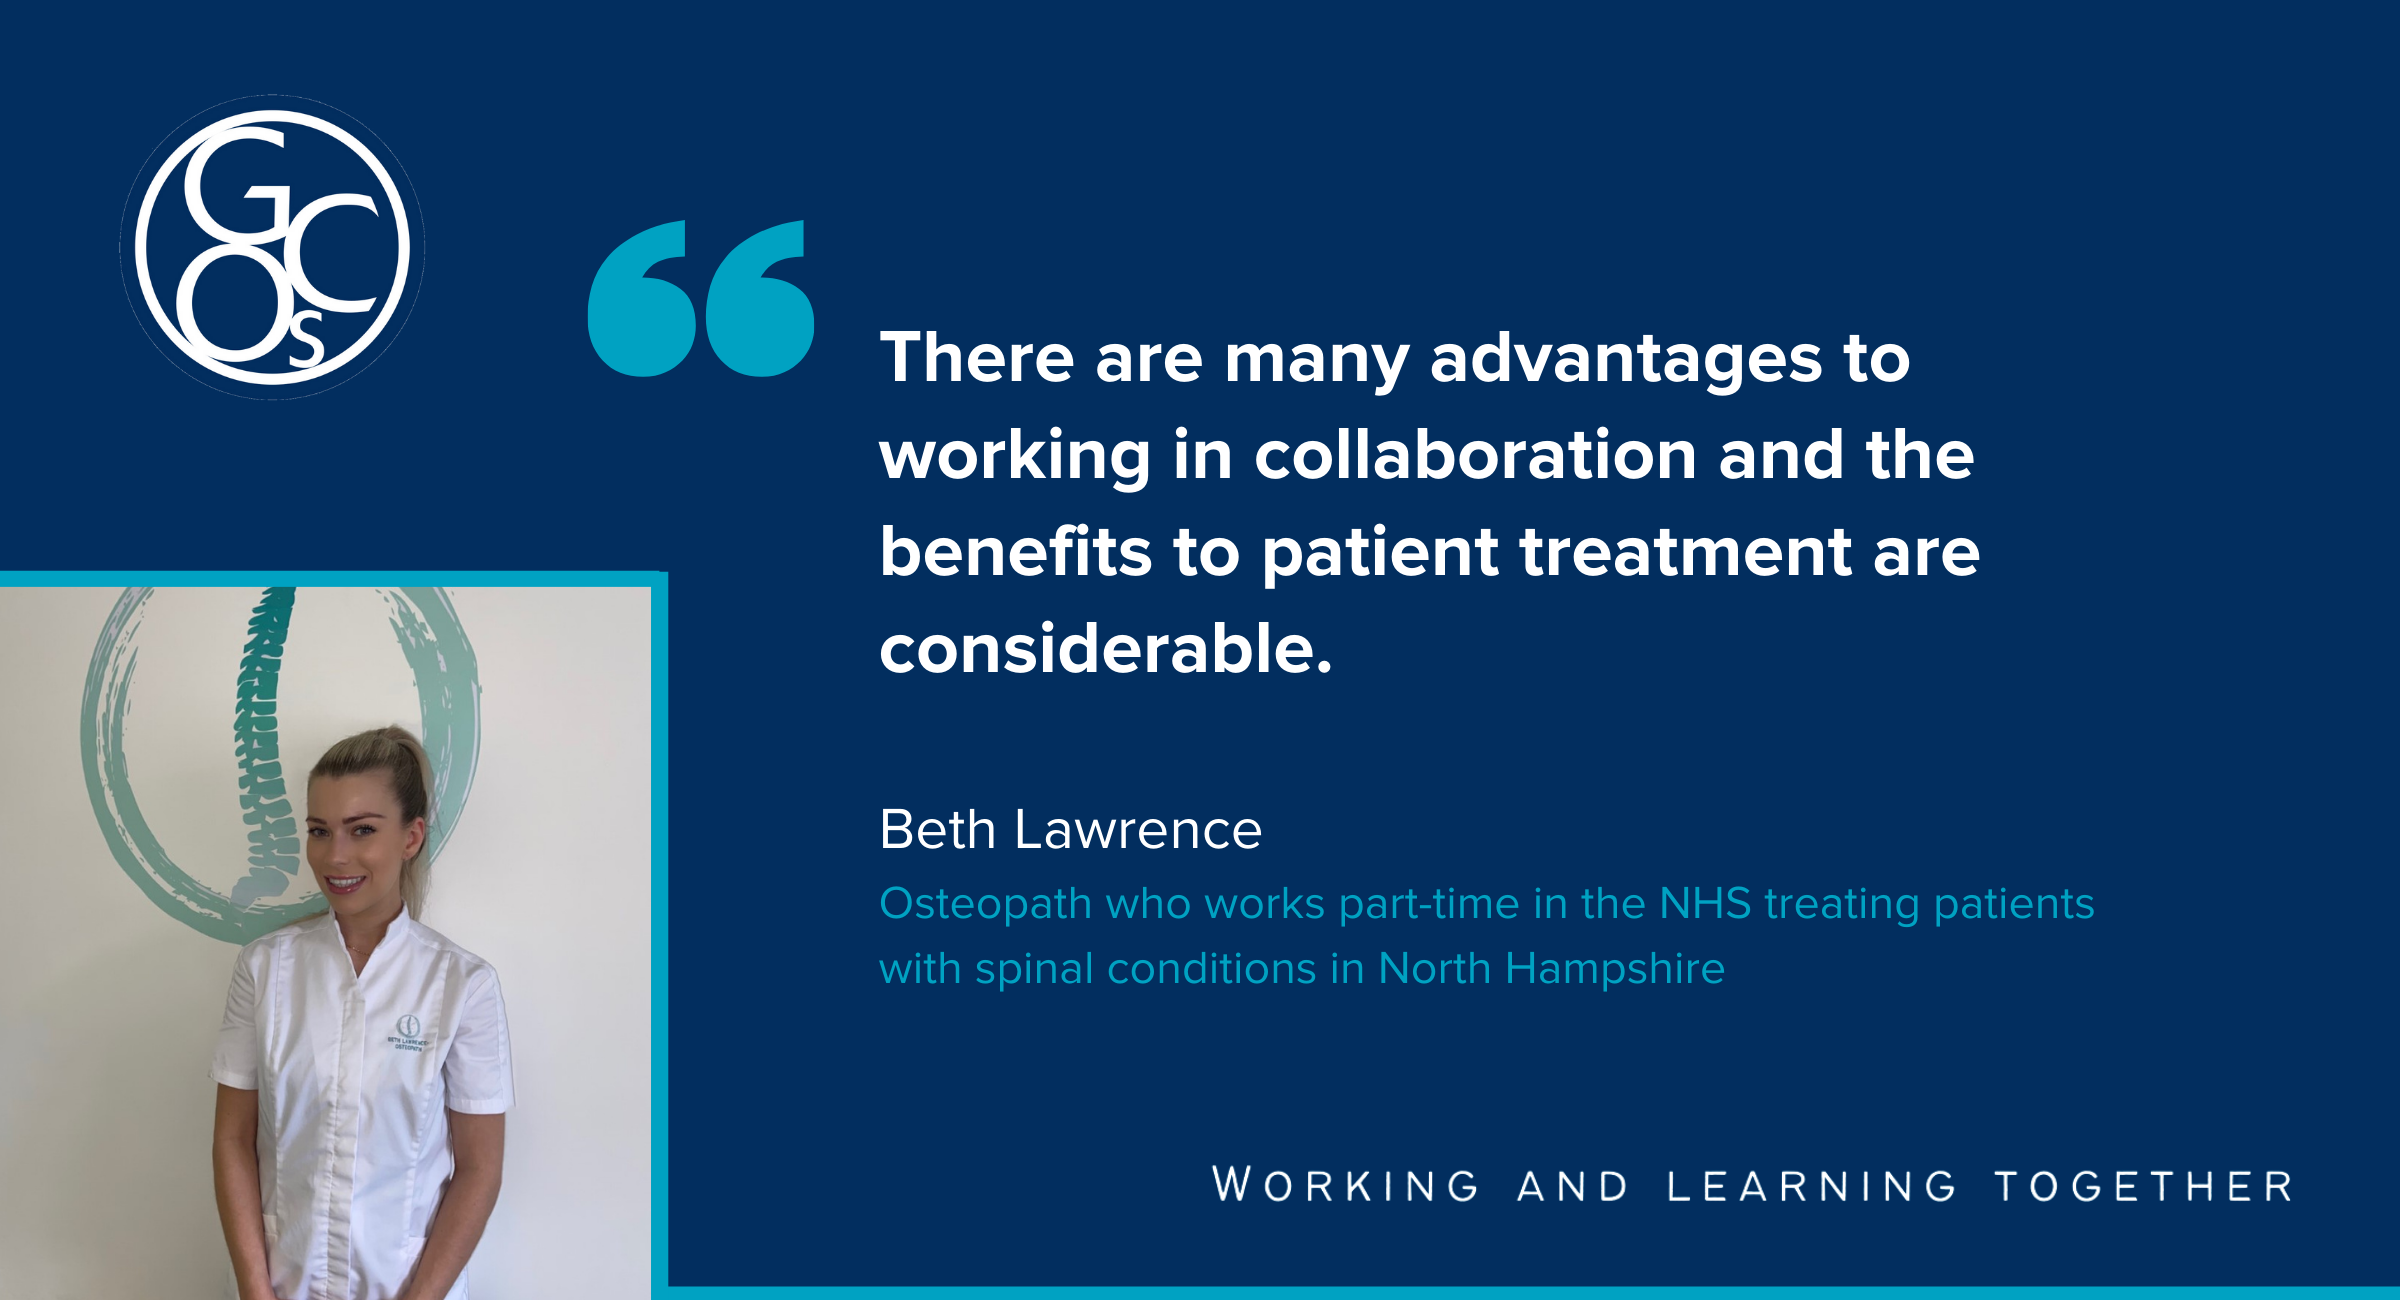 There are many advantages to working in collaboration and the benefits to patient treatment are considerable